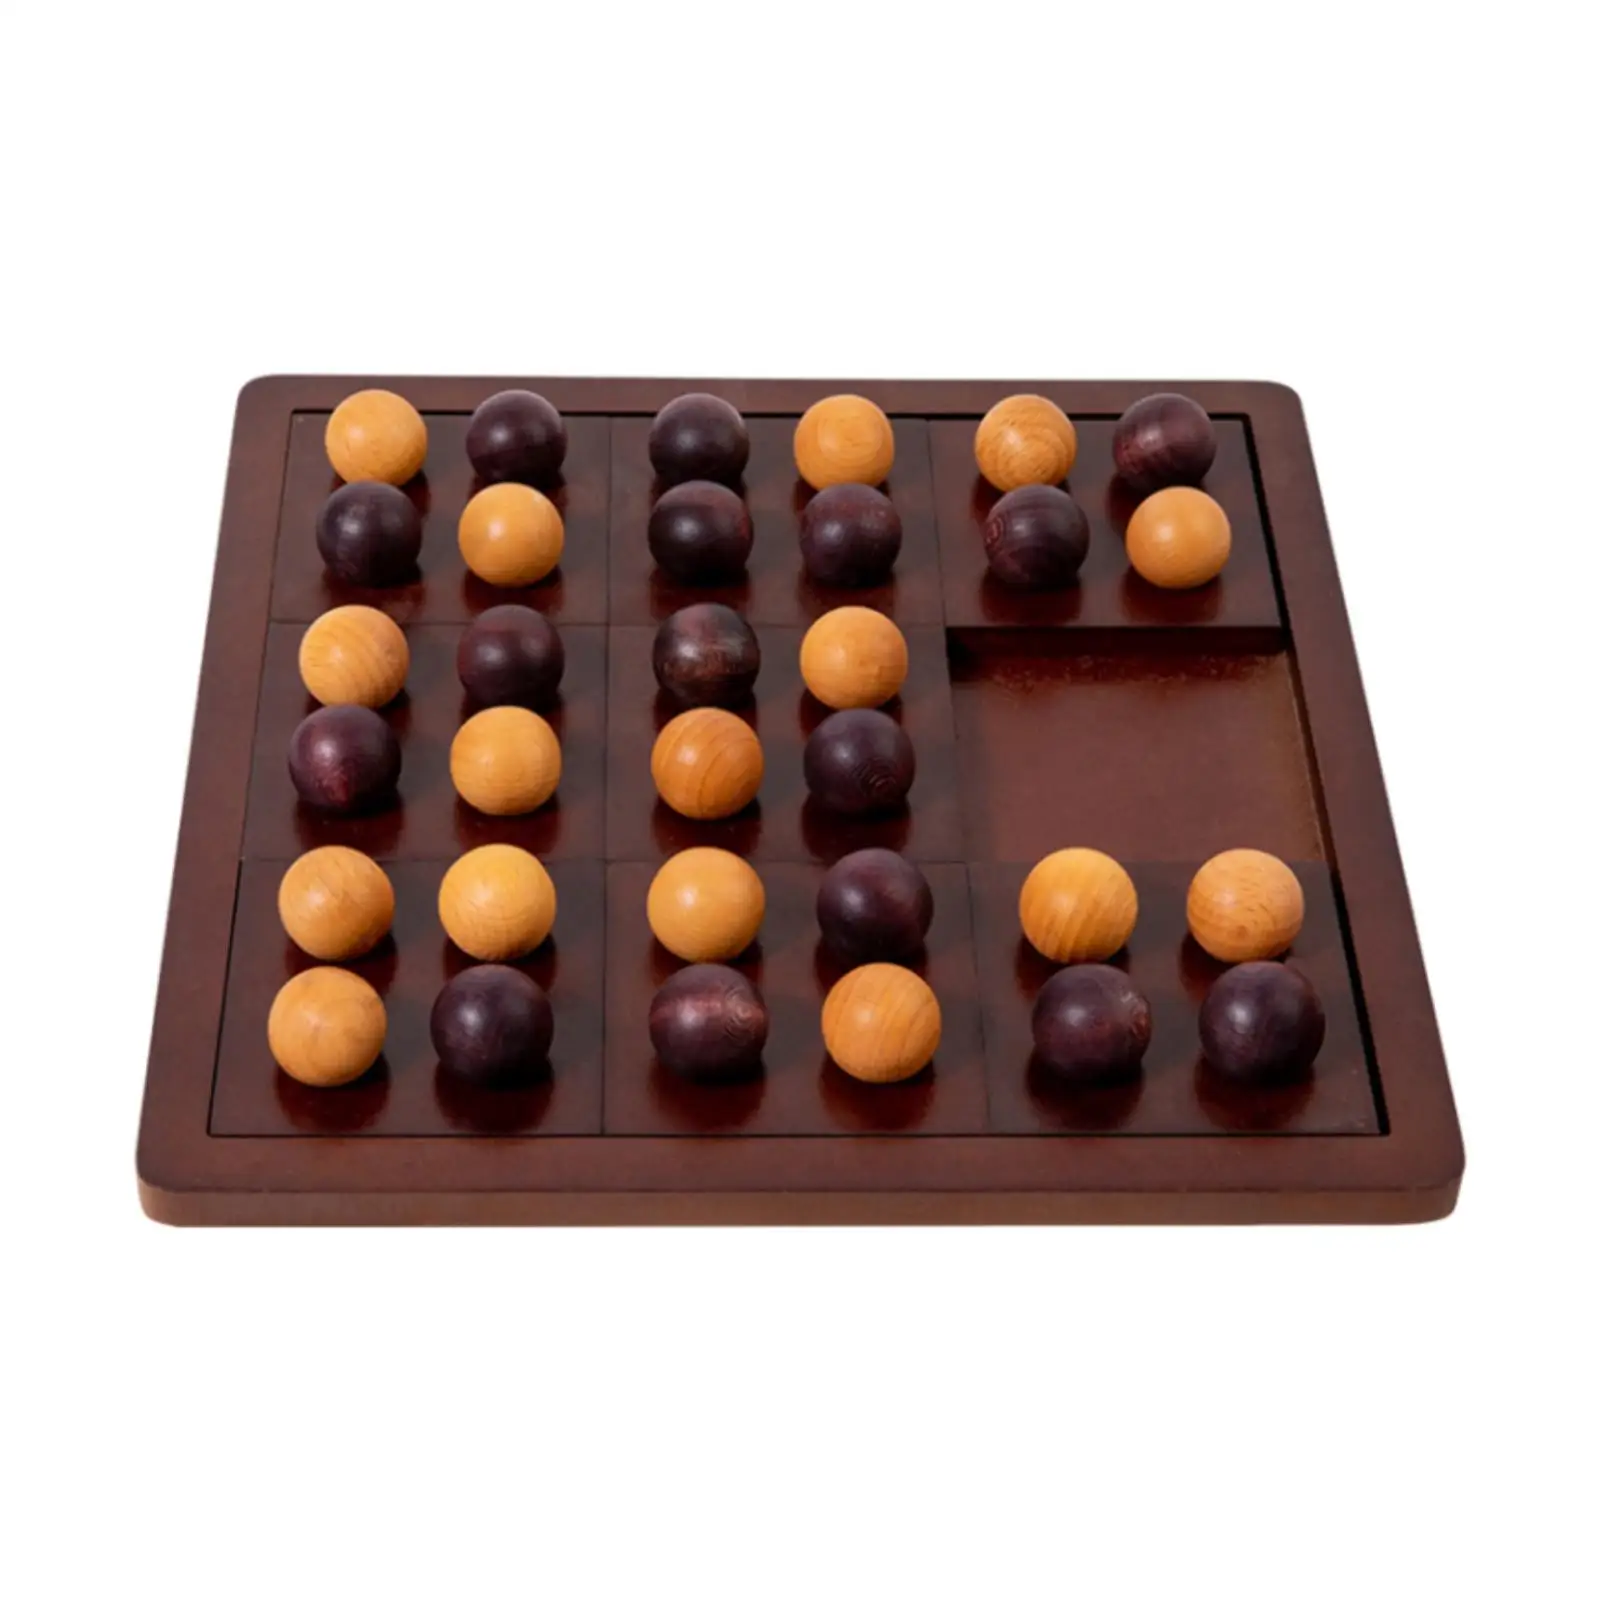 Tic TAC Toe Game Classic Handmade Parent Child Interaction Game Board Game for Kids Adult Indoor Outdoor Families Holiday Gifts